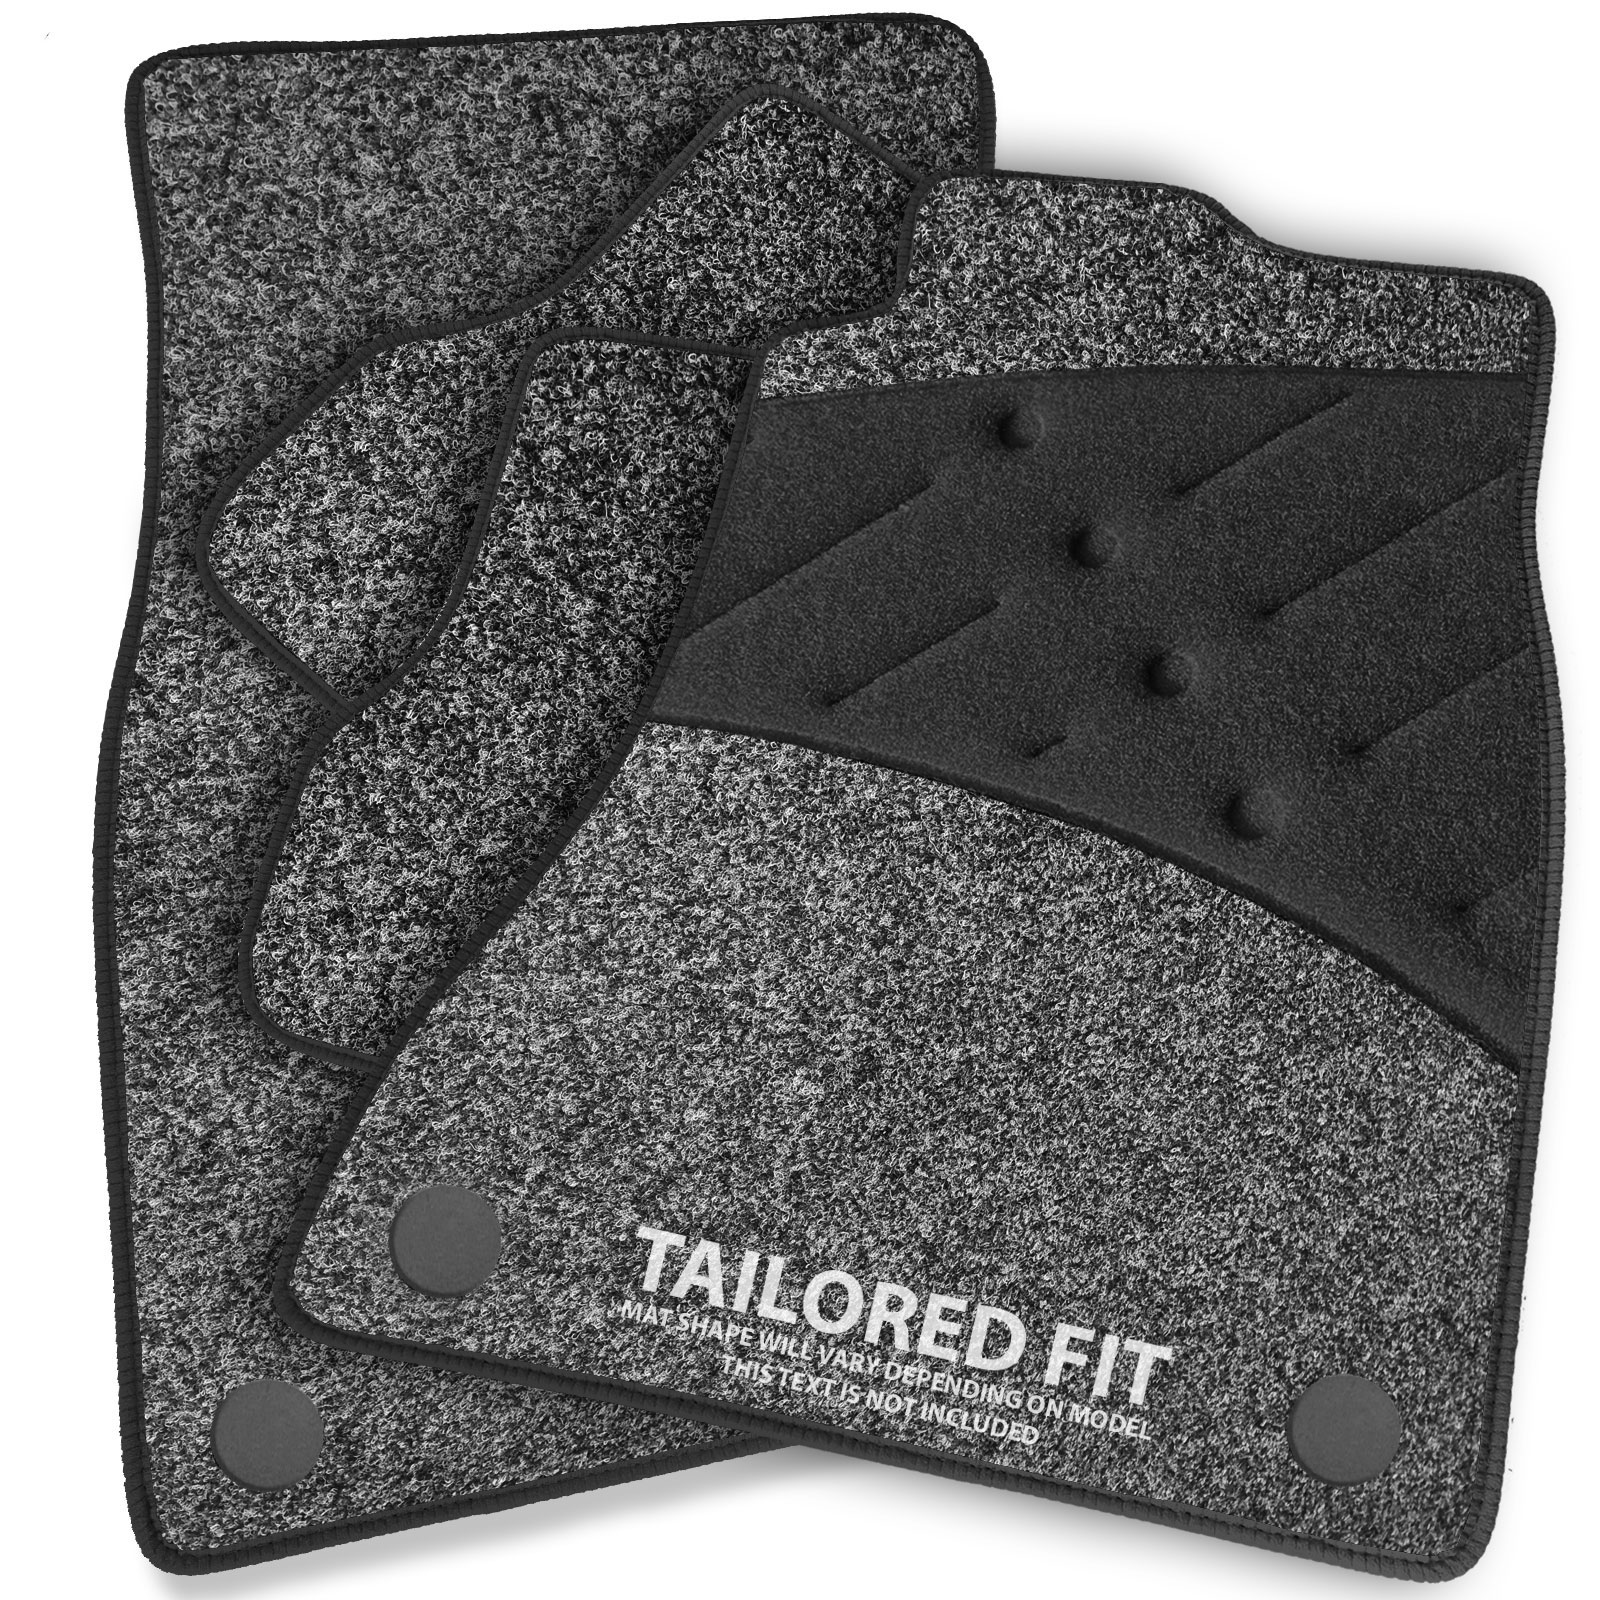 To Fit Fits For Nissan Almera Tailored Car Mats 1998-2000